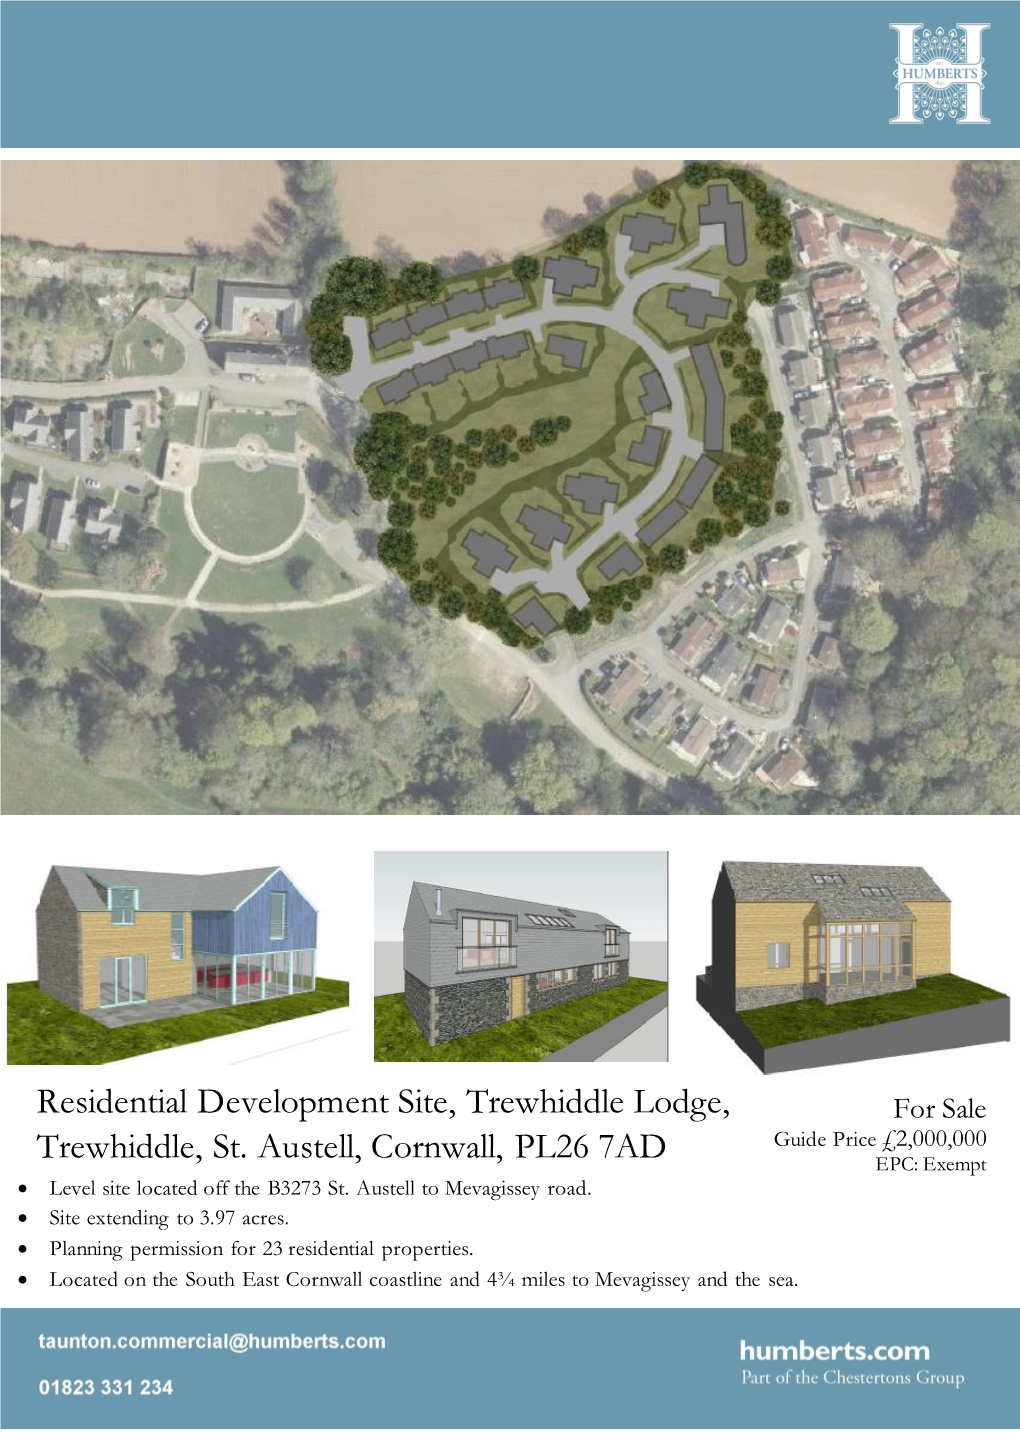 Residential Development Site, Trewhiddle Lodge, Trewhiddle, St. Austell, Cornwall, PL26